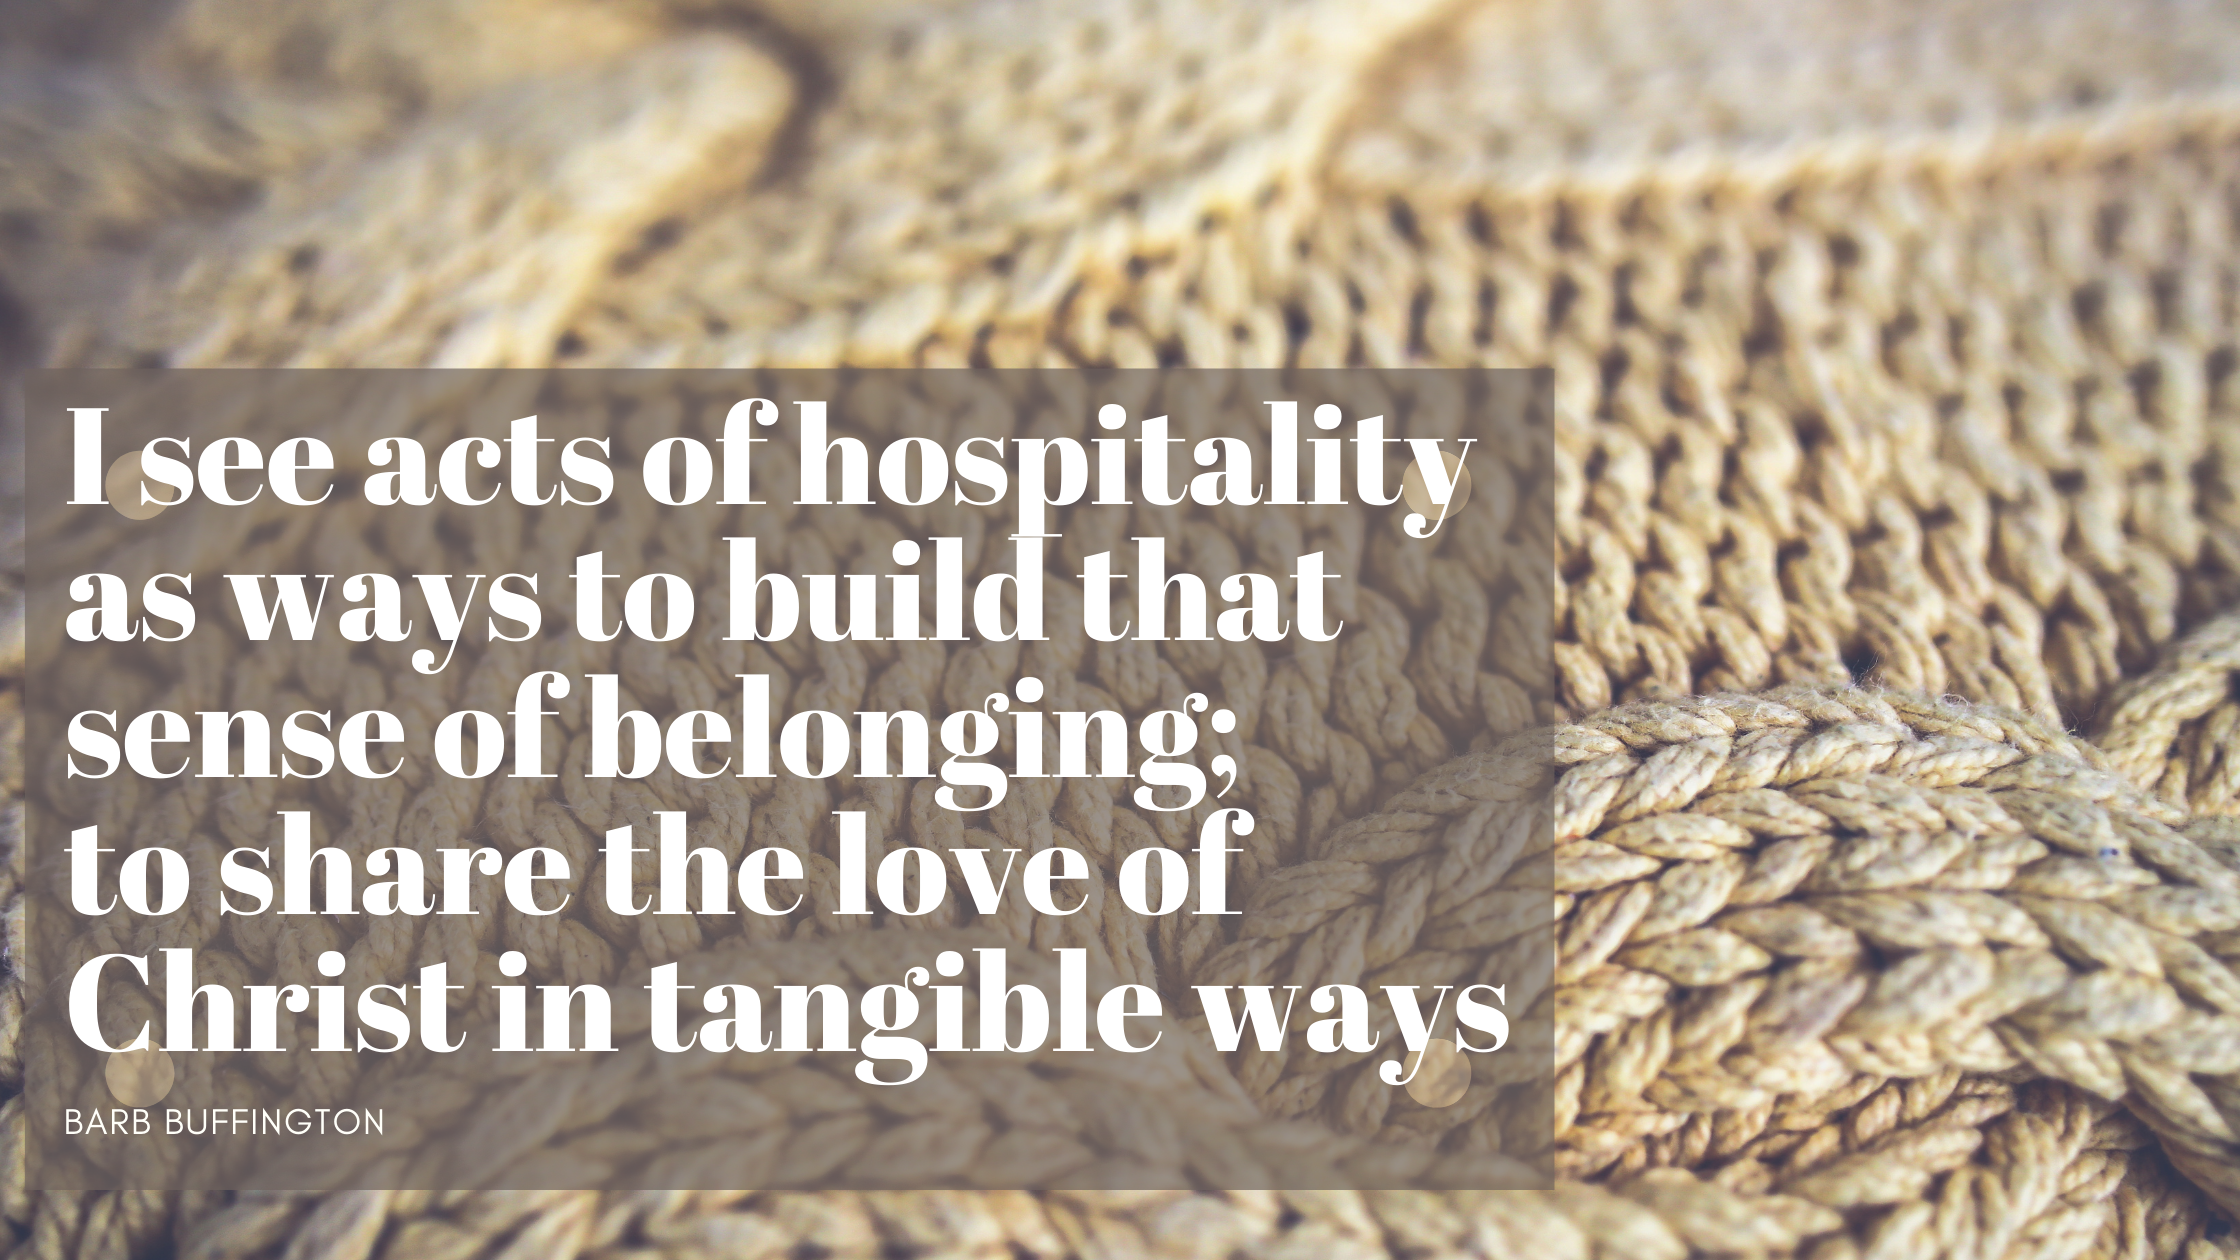 I see acts of hospitality as ways to build that sense of belonging; to share the love of Christ in tangible ways